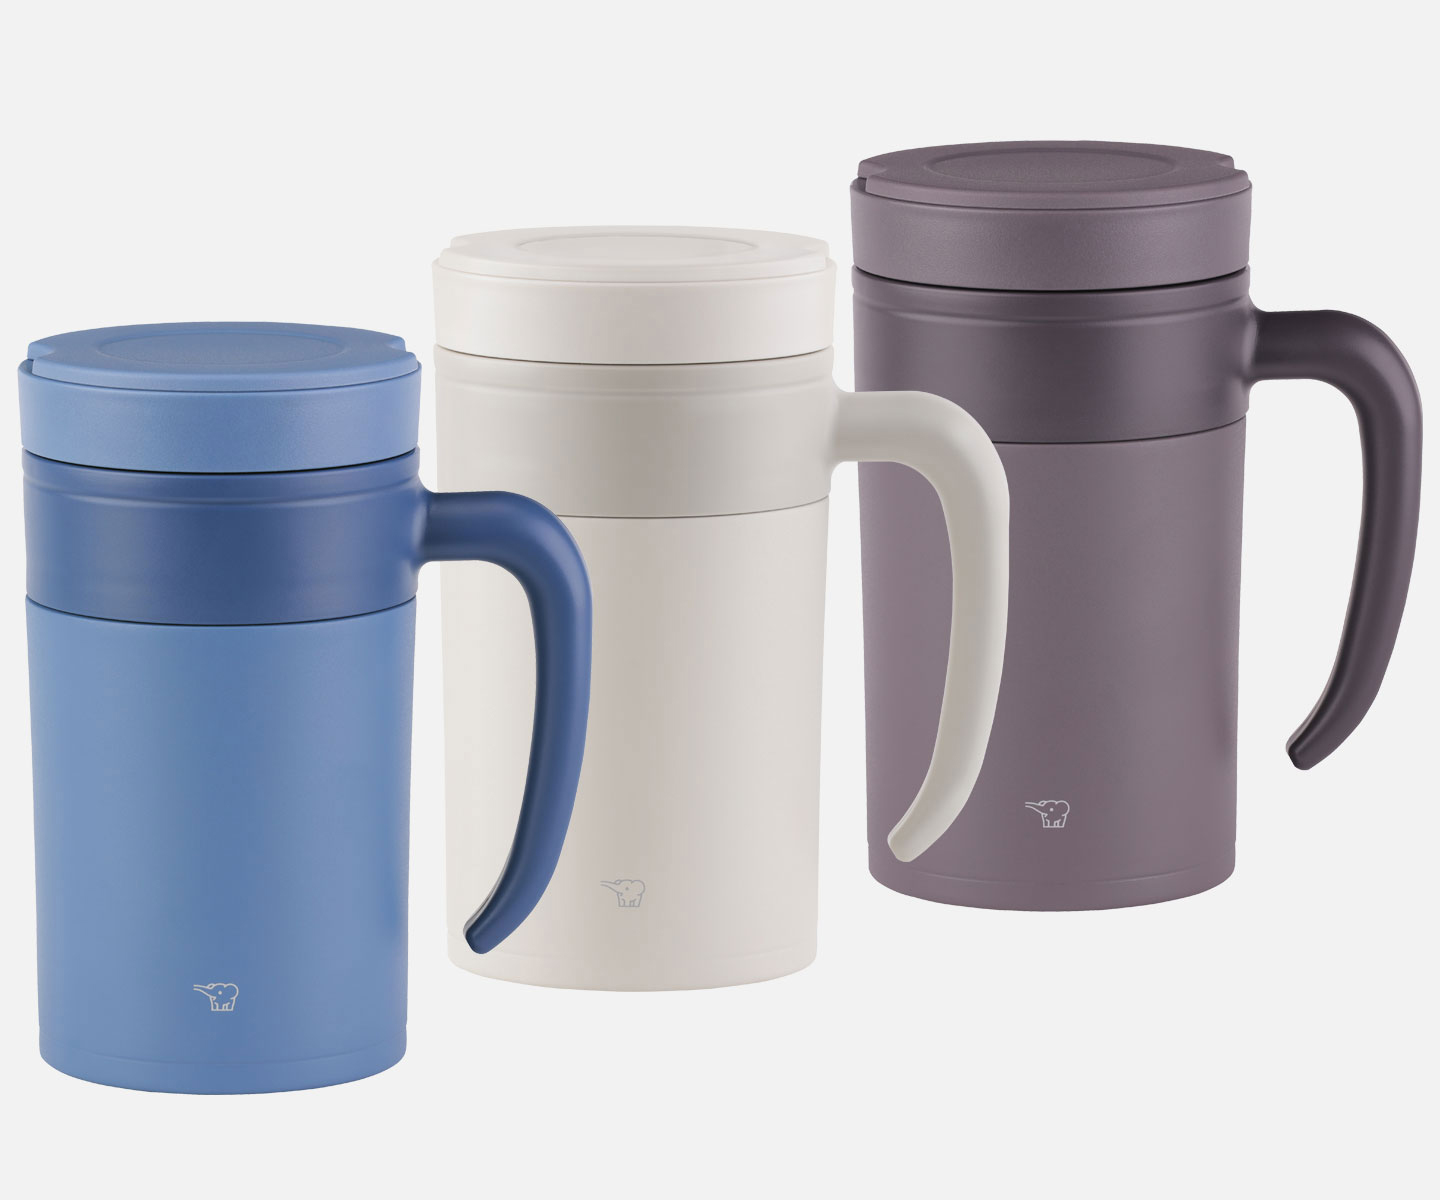 Three tumblers with a handle in diagonal formation, in colors blue, white and brown in this order.